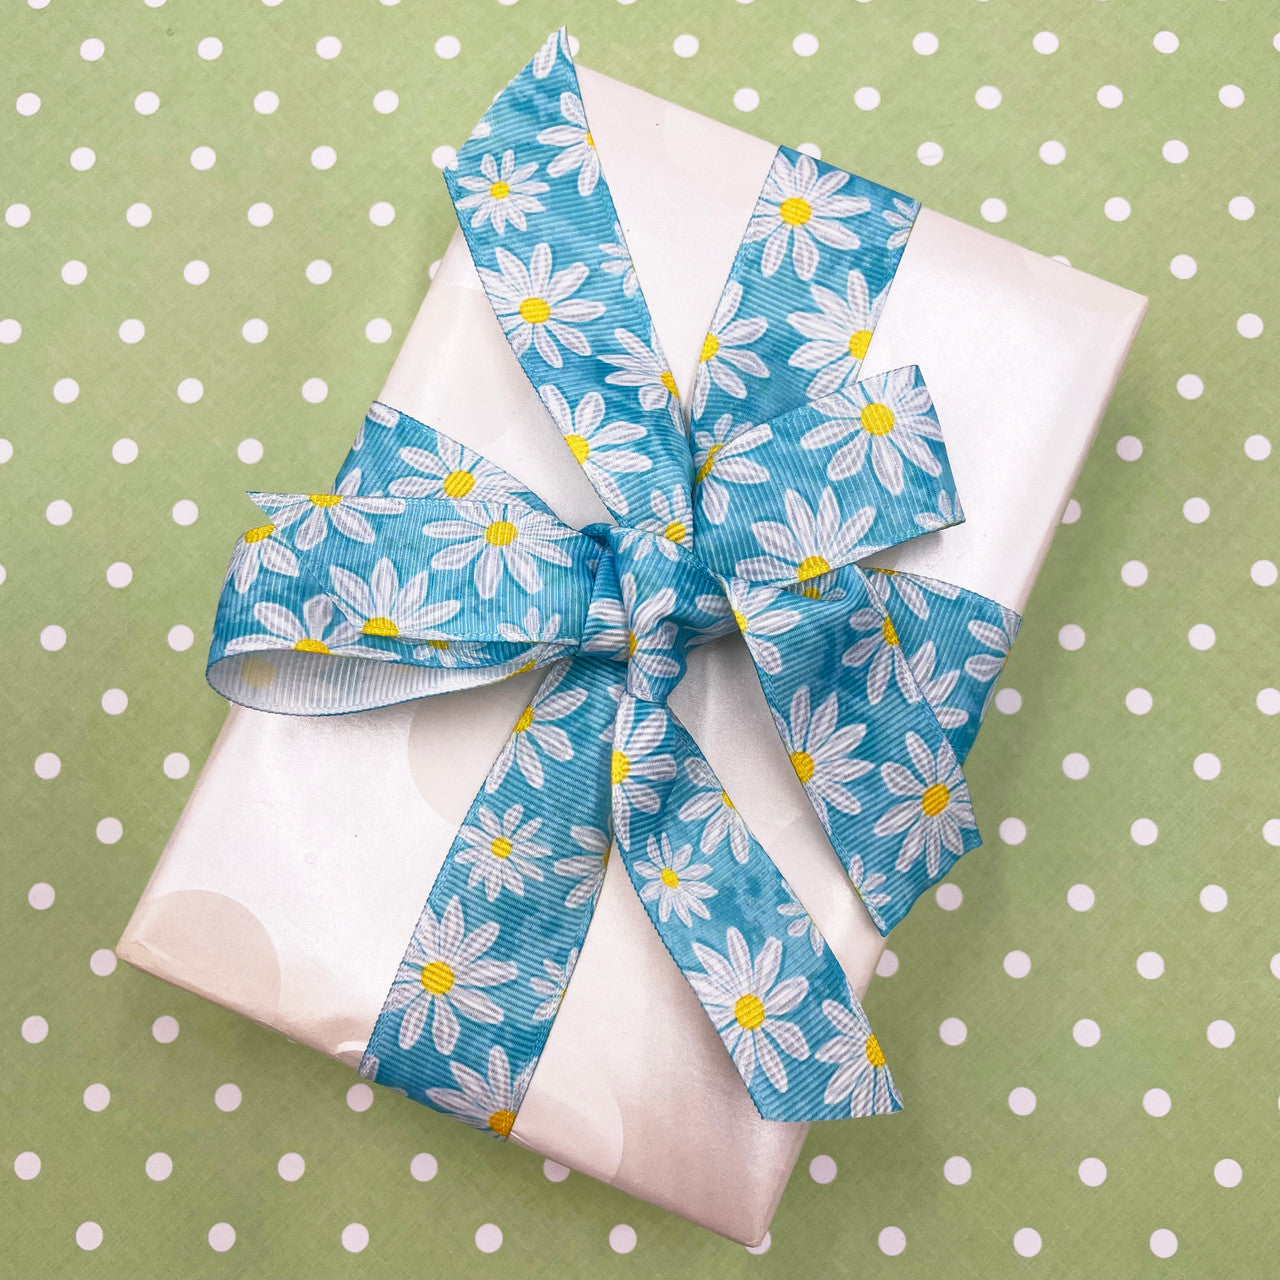 Tie a beautiful bow on plain white paper for a lovely Spring or Mother's Day gift! 